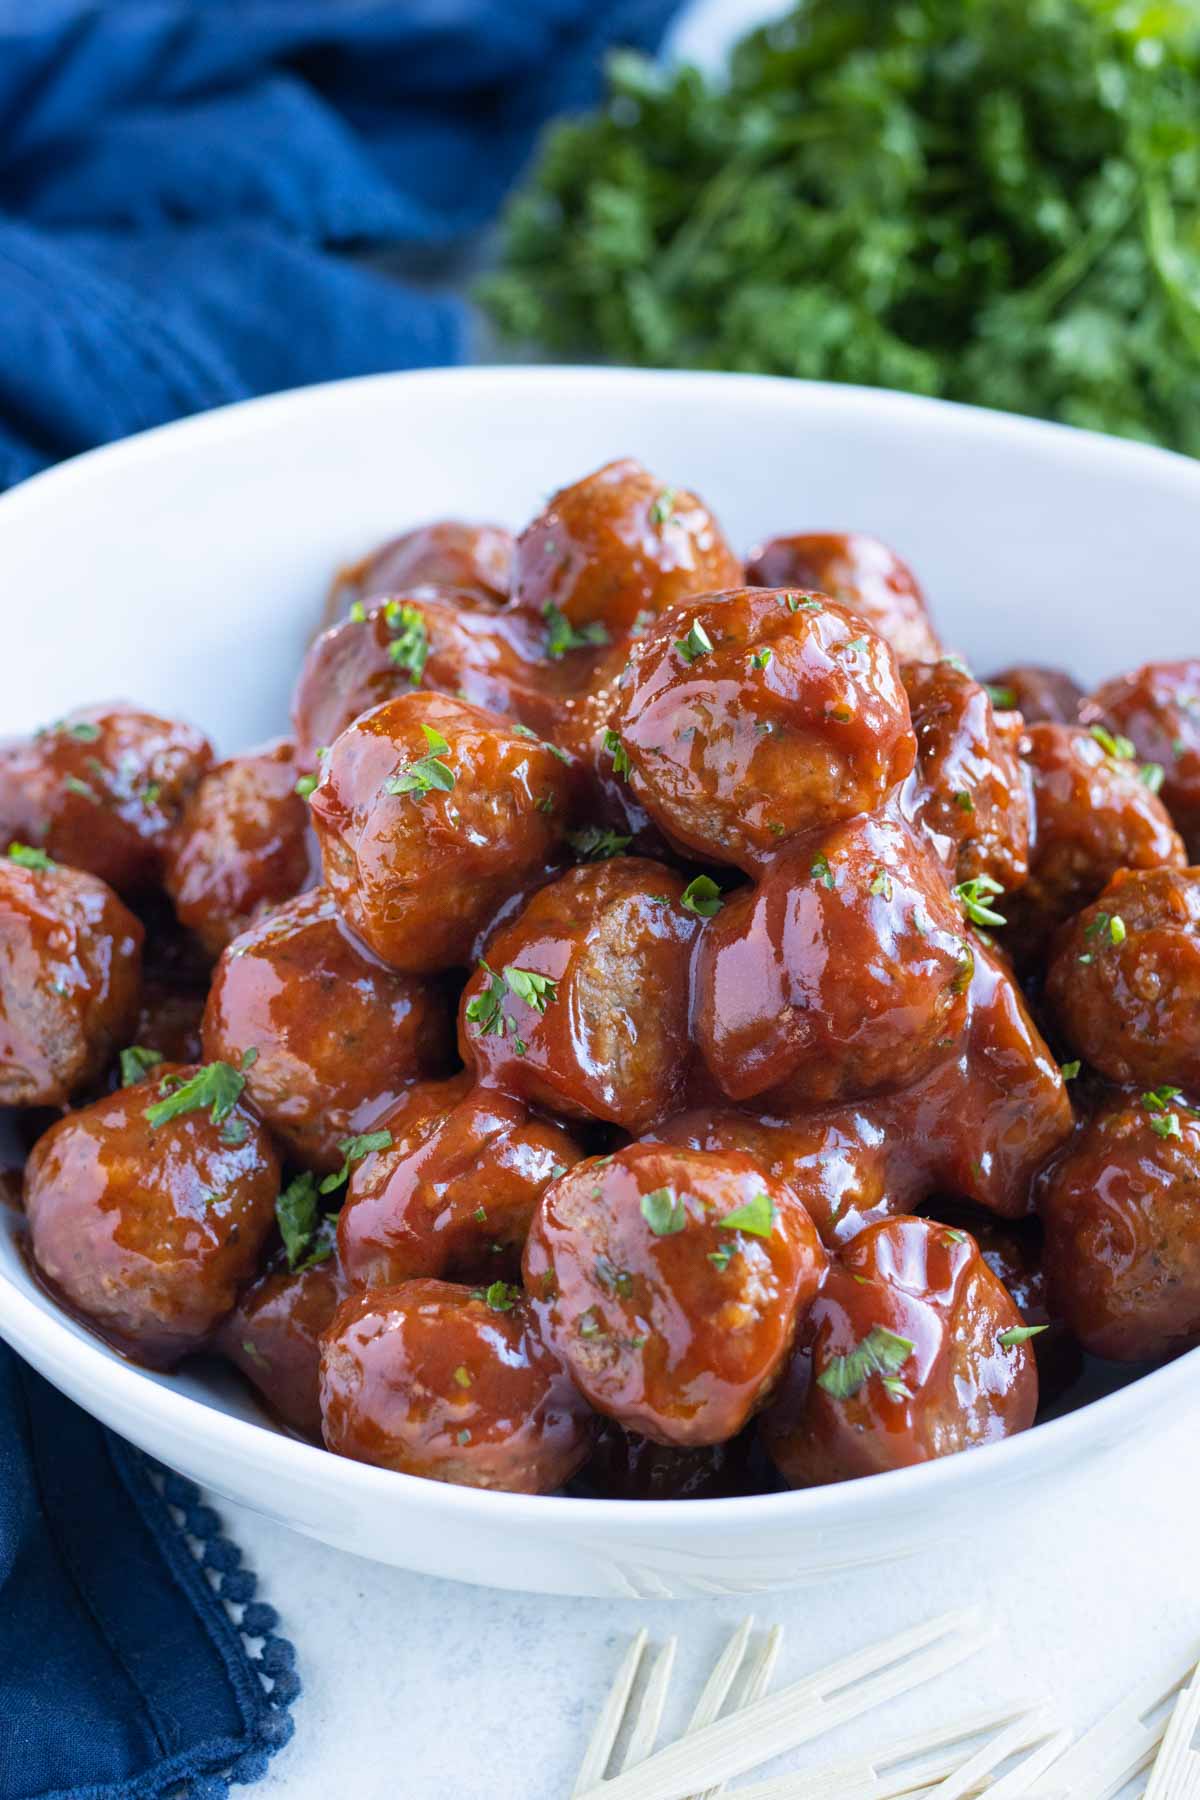 Meatballs are served in a white bowl on the table.